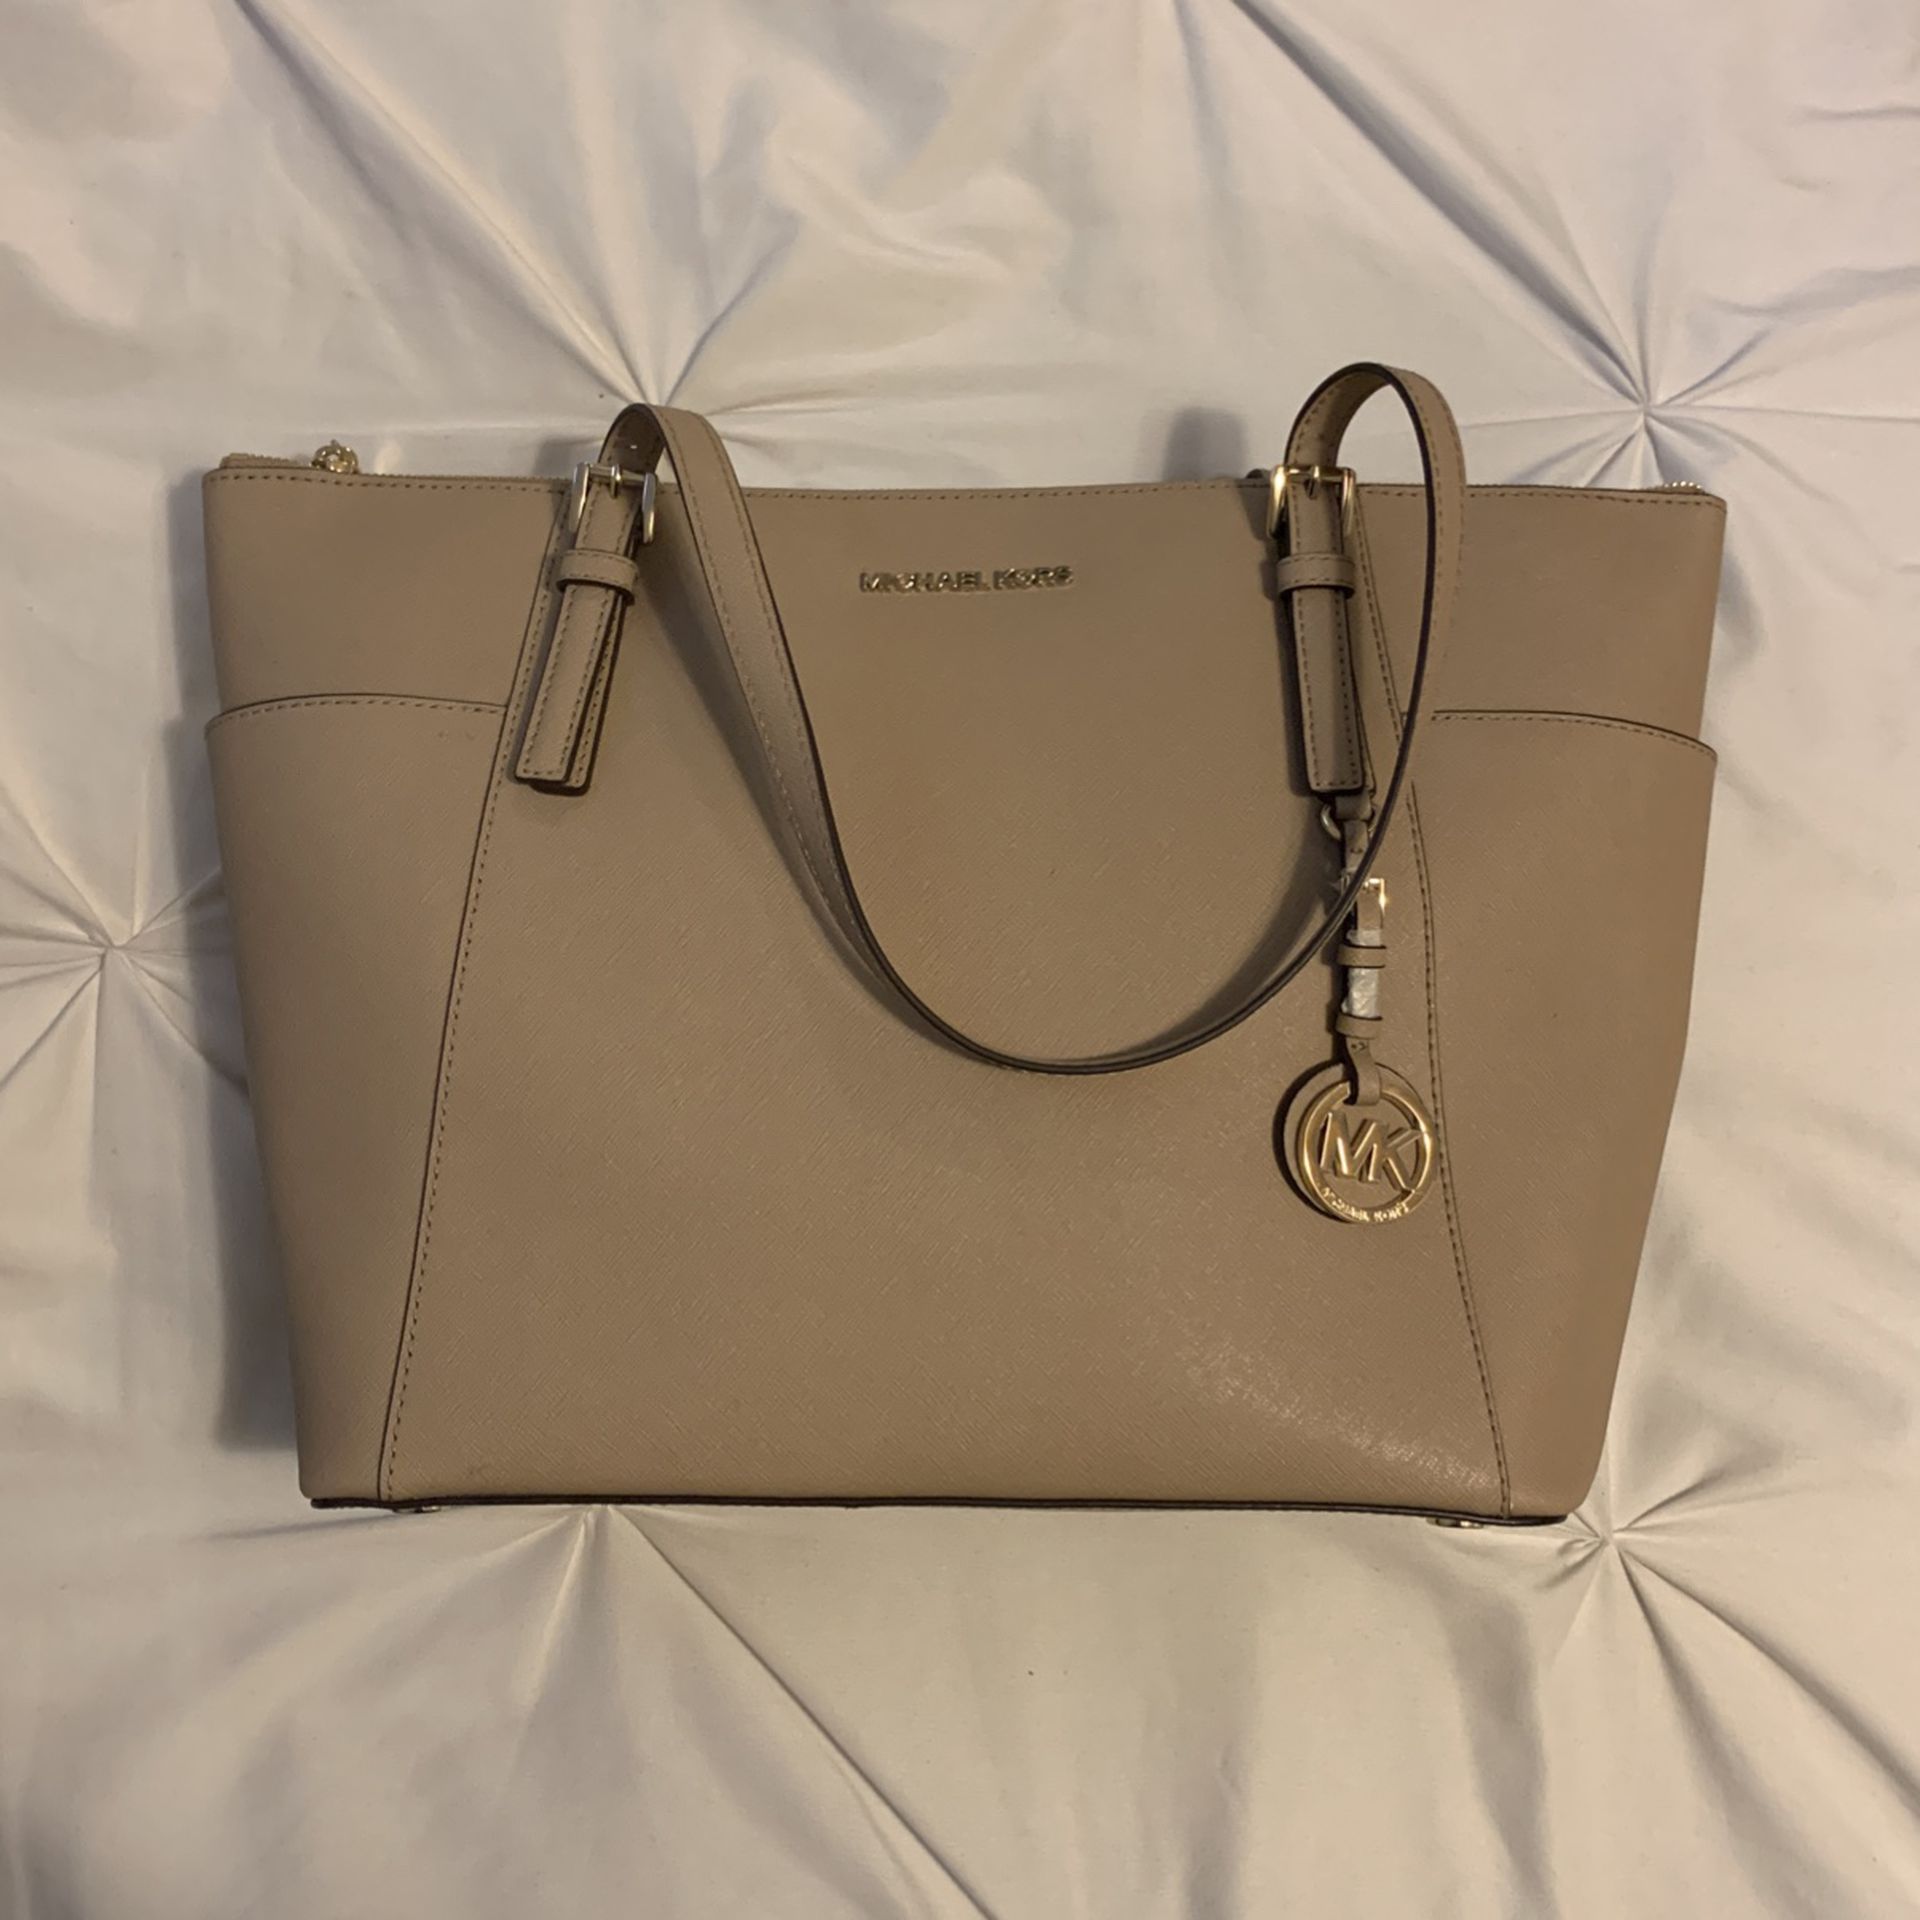 Brand New Michael Kors Jet Set Leather Tote Bag in Truffle